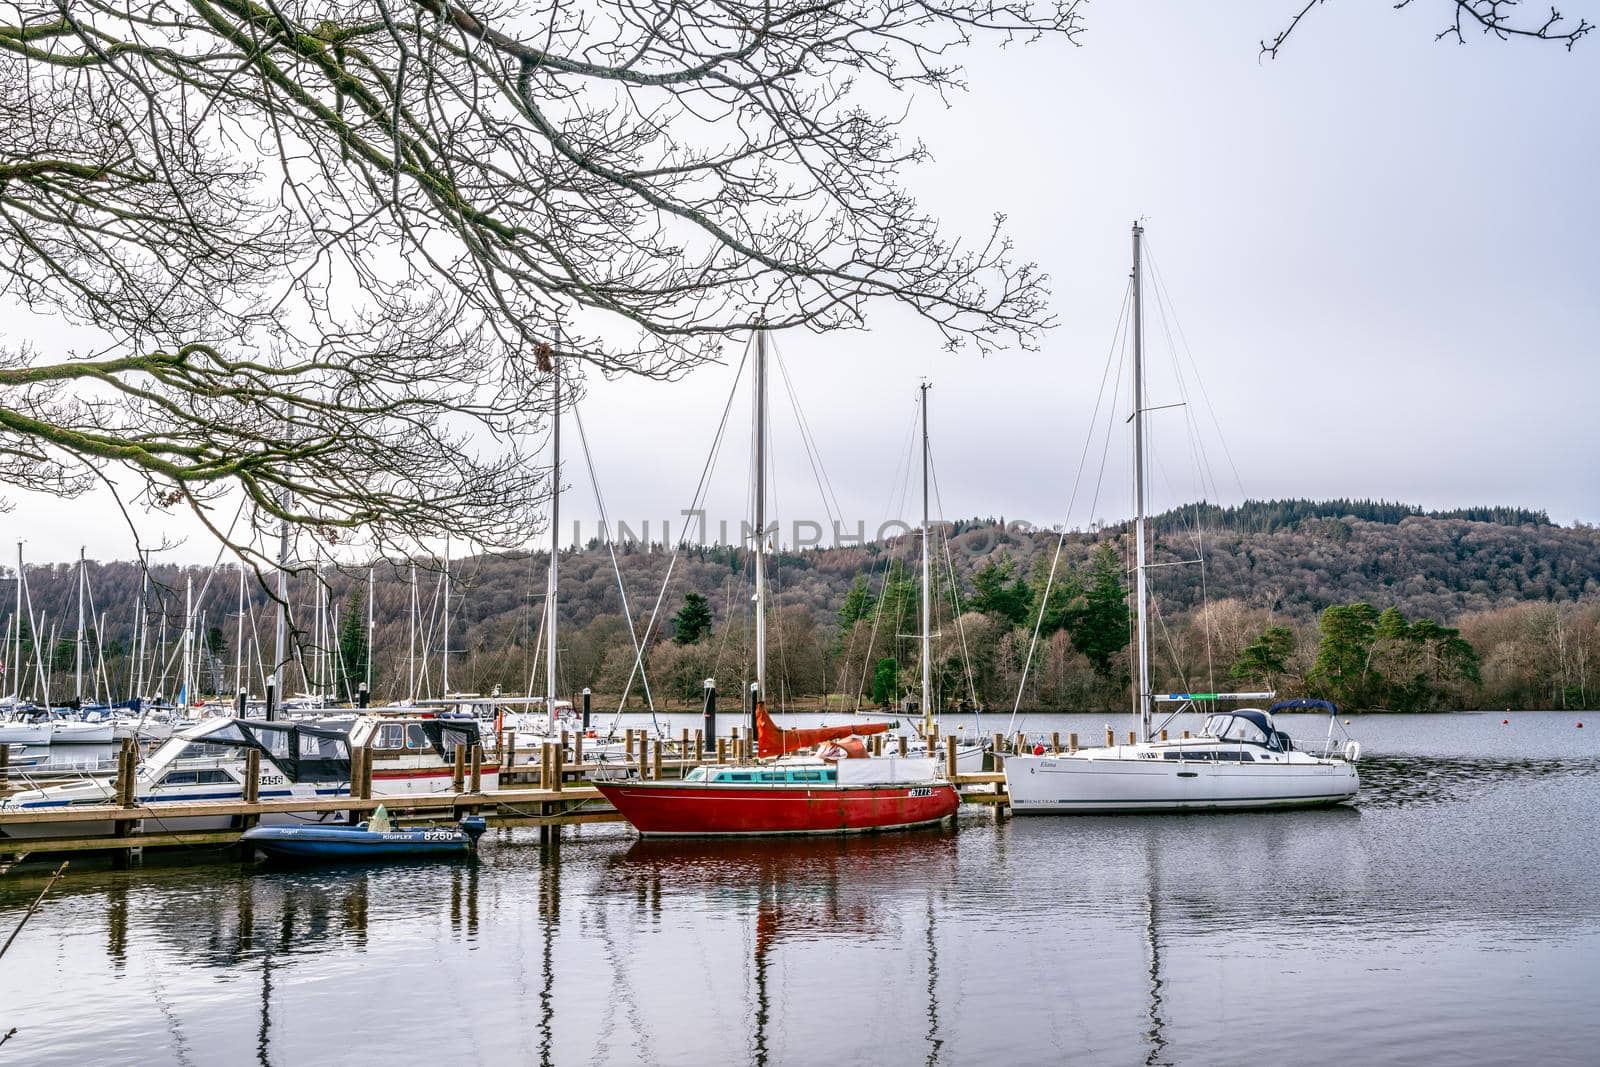 Bowness on Windermere, Cumbria, UK - February 01, 2021: Tourist pleasure boats on Bowness Bay Lake Windermere during covid lockdown